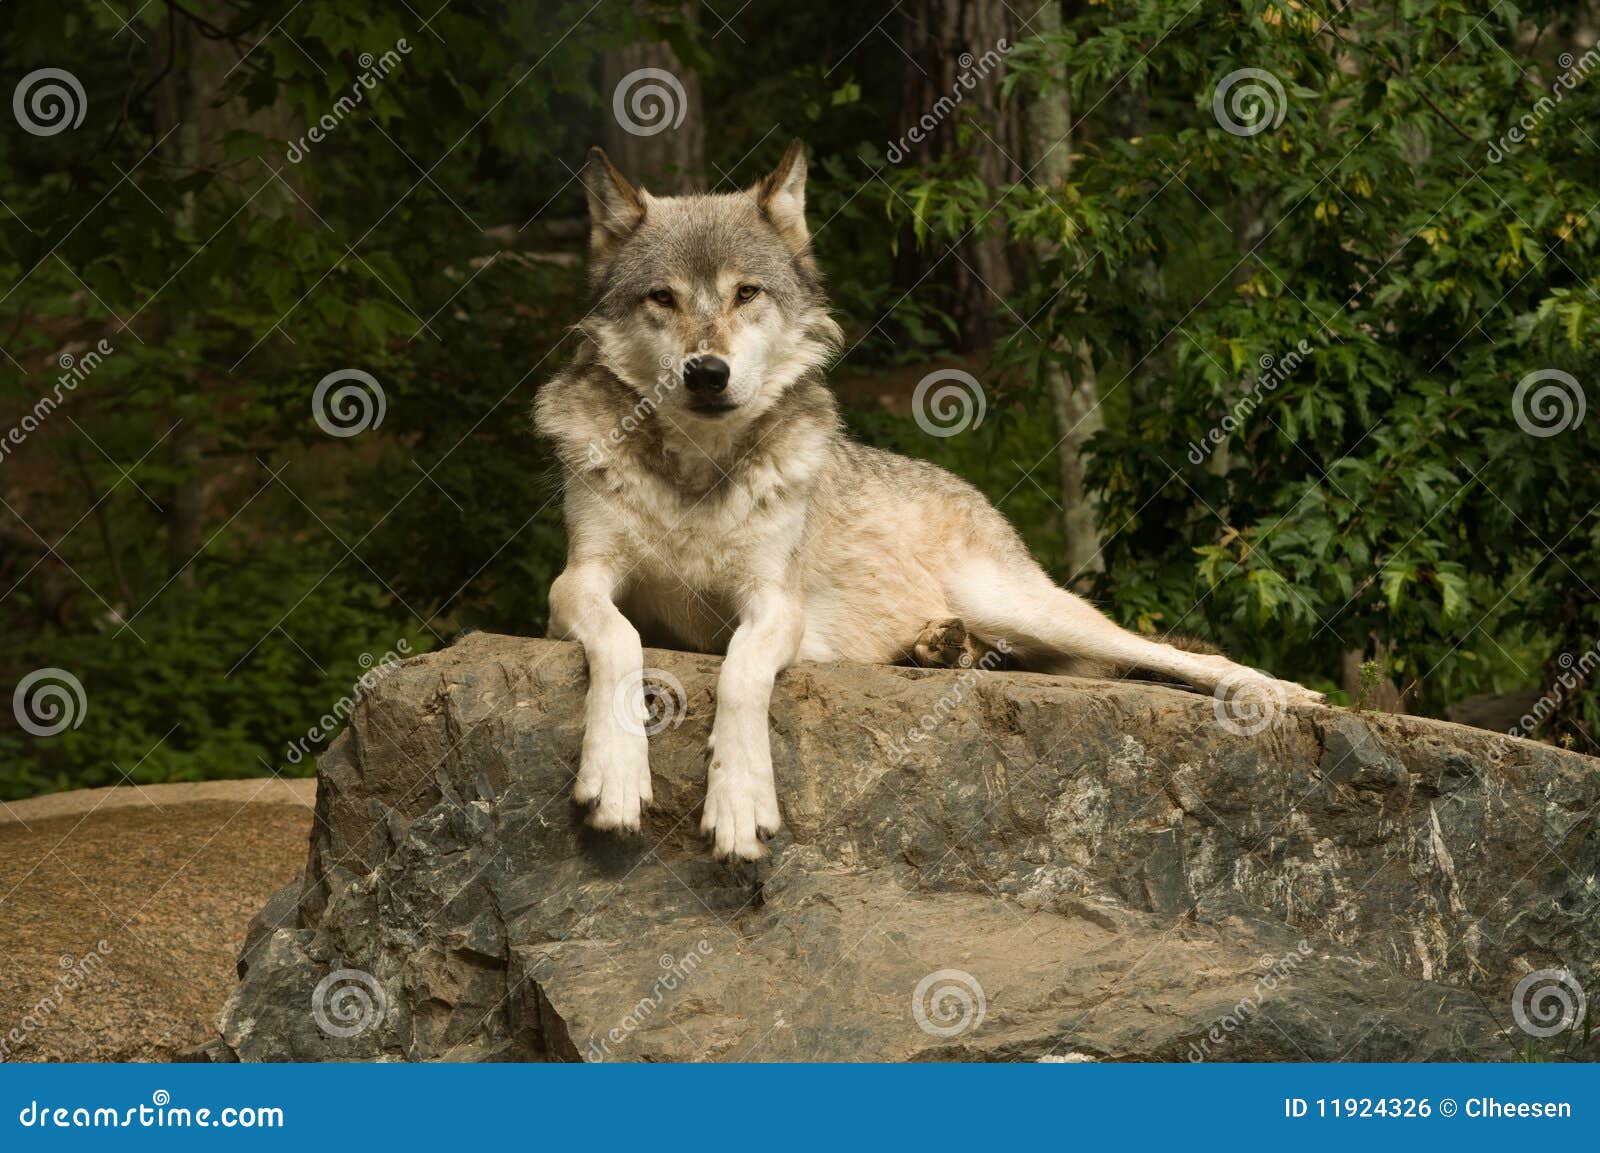 great plains wolf on rock